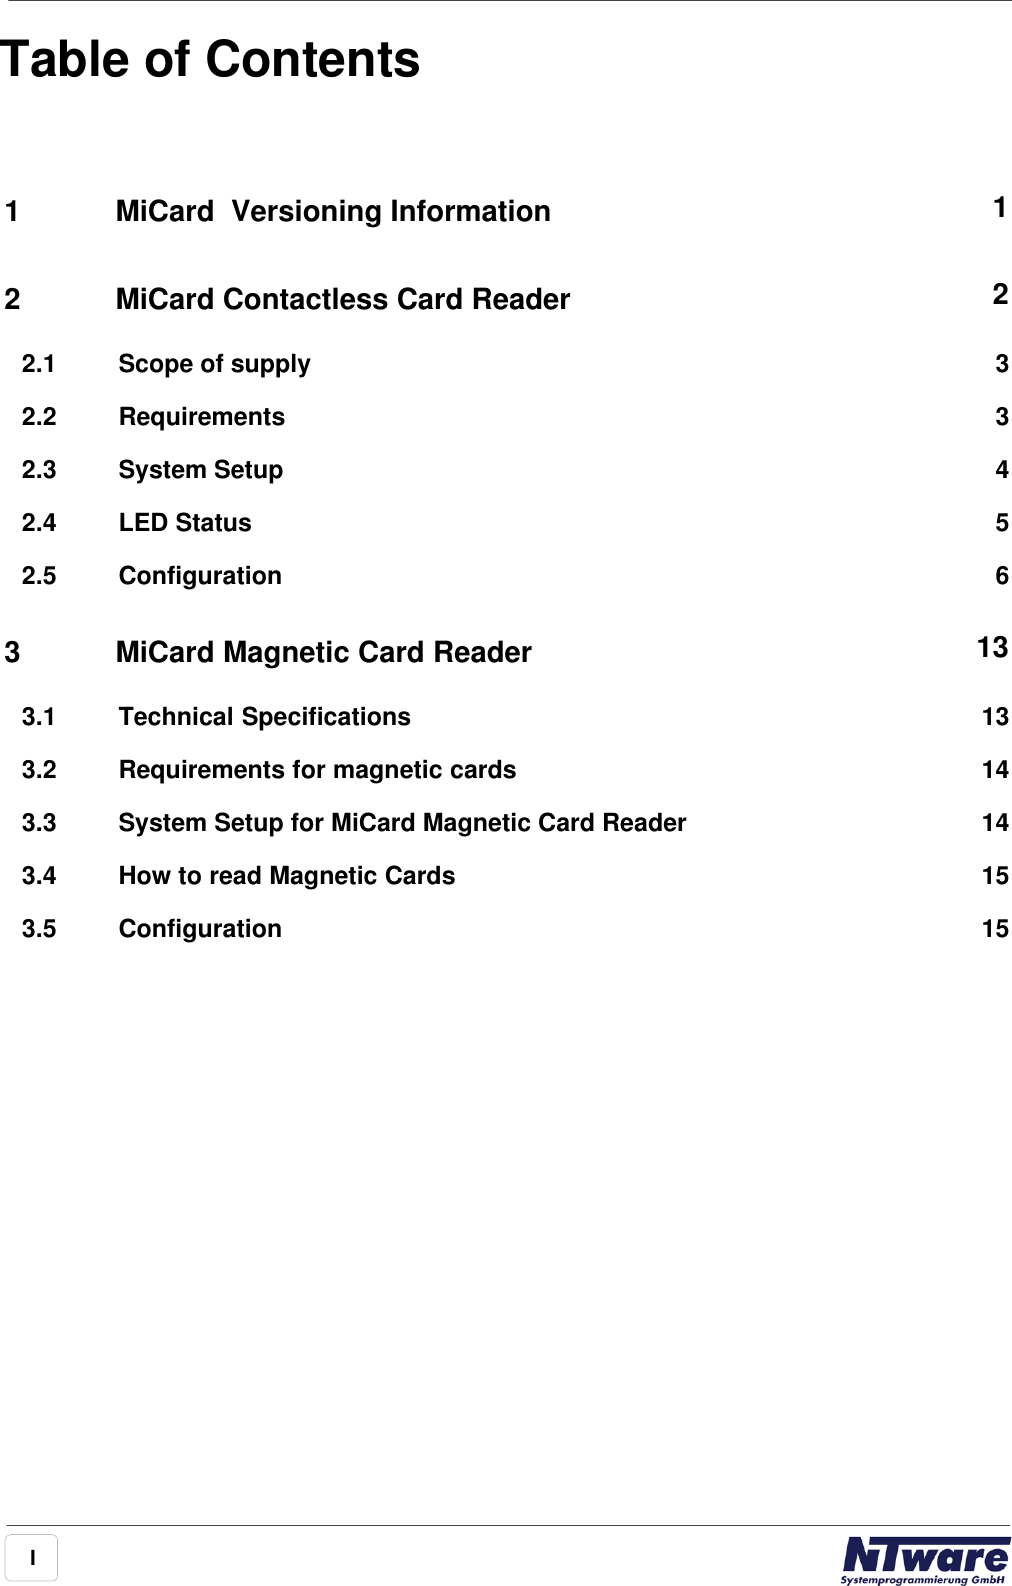 ITable of ContentsForeword 01MiCard  Versioning Information 12MiCard Contactless Card Reader 232.1 Scope of supply32.2 Requirements42.3 System Setup52.4 LED Status62.5 Configuration3MiCard Magnetic Card Reader 13133.1 Technical Specifications143.2 Requirements for magnetic cards143.3 System Setup for MiCard Magnetic Card Reader153.4 How to read Magnetic Cards153.5 ConfigurationIndex 0